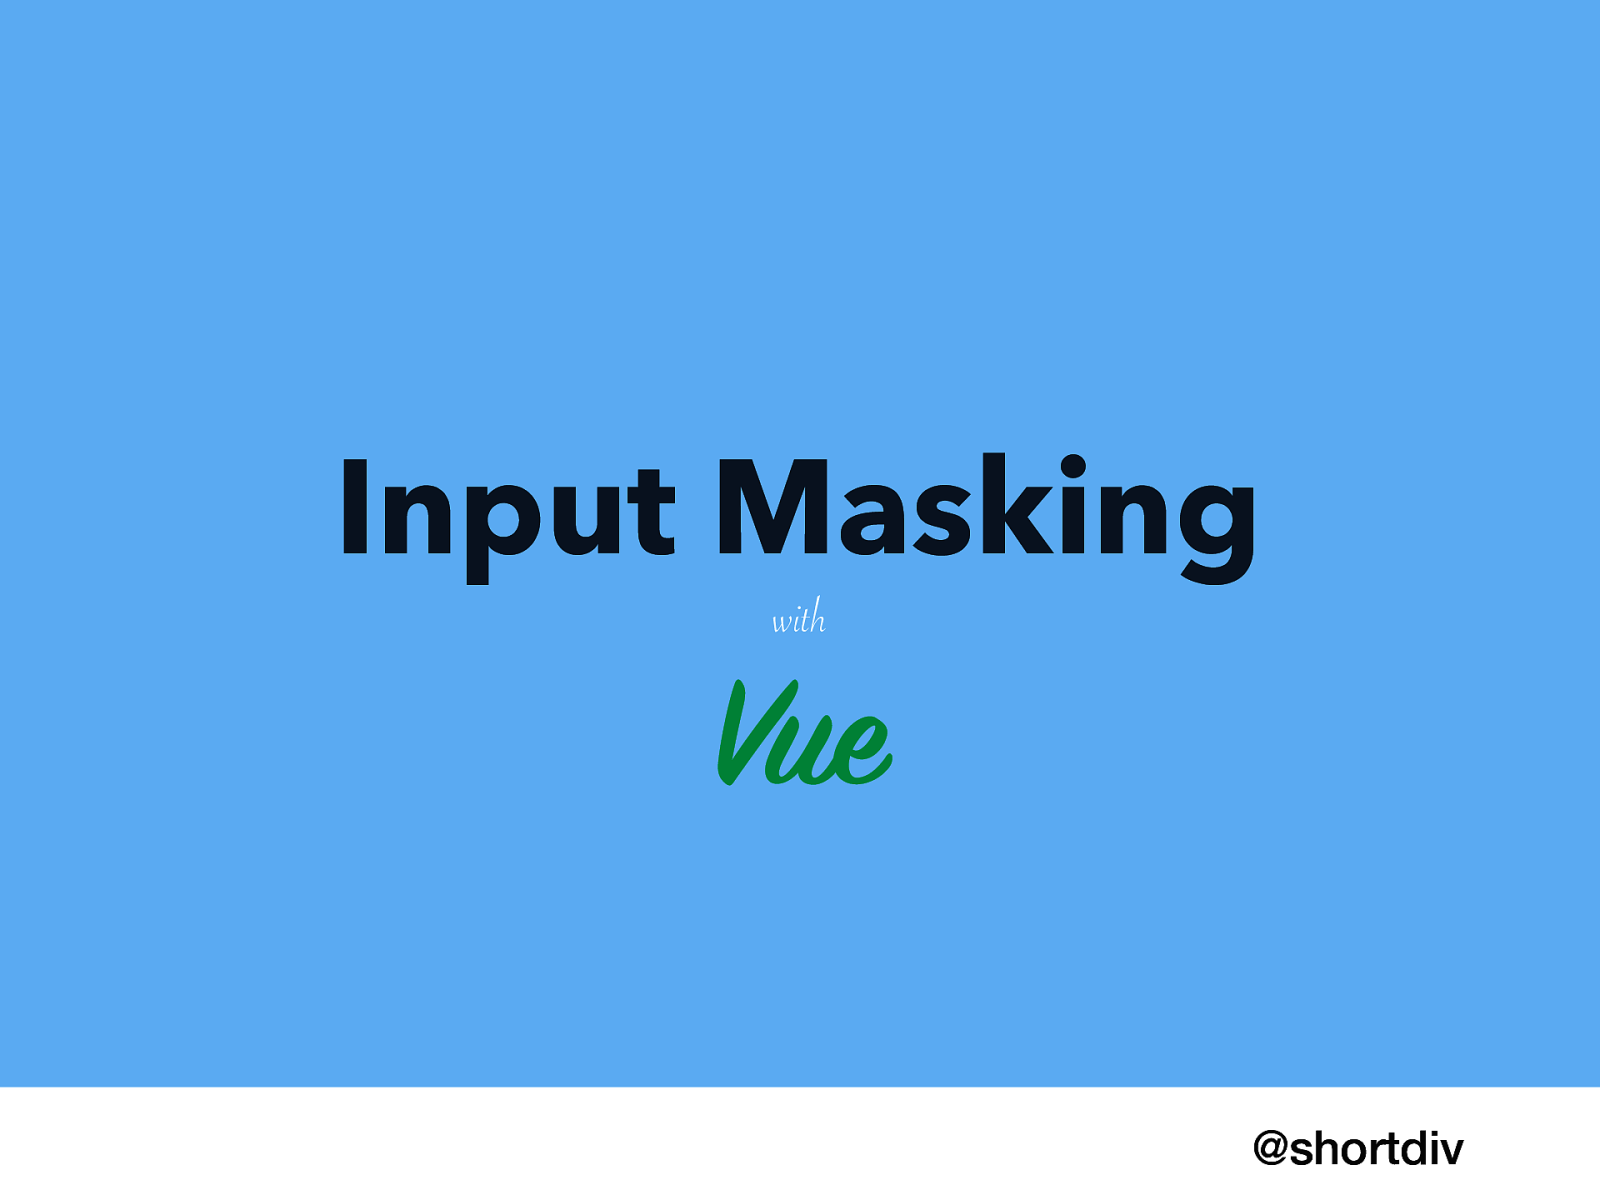 Input Masking with Vue